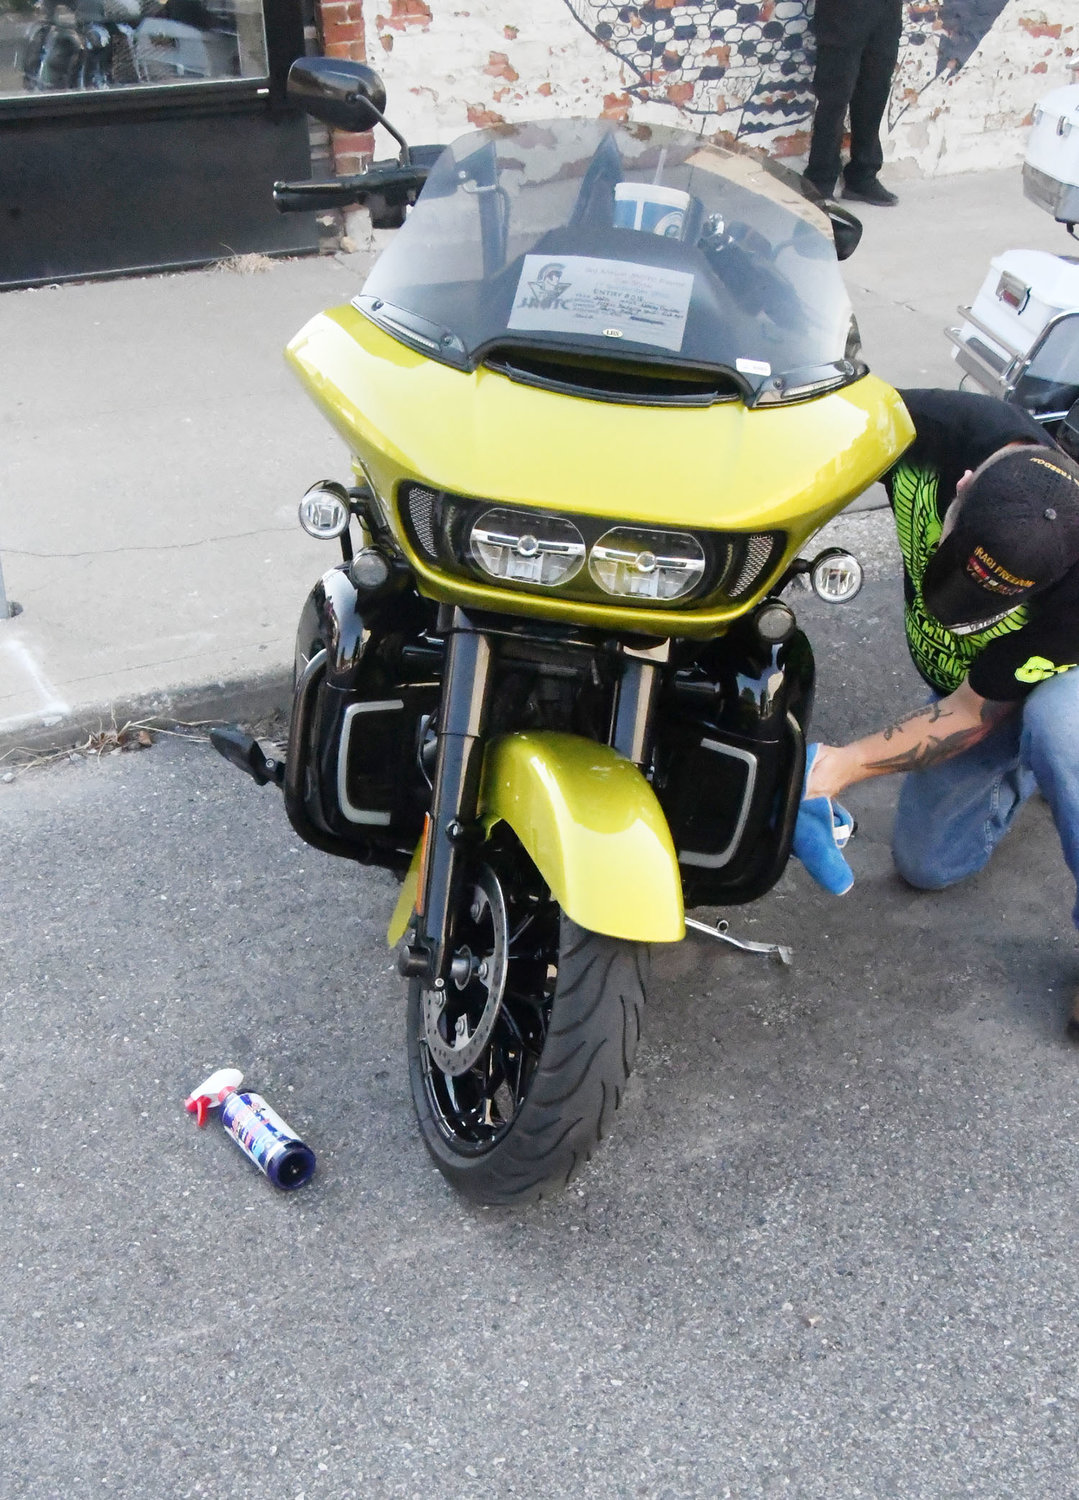 Gary Coon's uniquely styled 2000 Harley-Davidson Road Glide Special, covered in lime green paint, was the out of stock class champion. Here, Coon shines up the cycle before showing it.